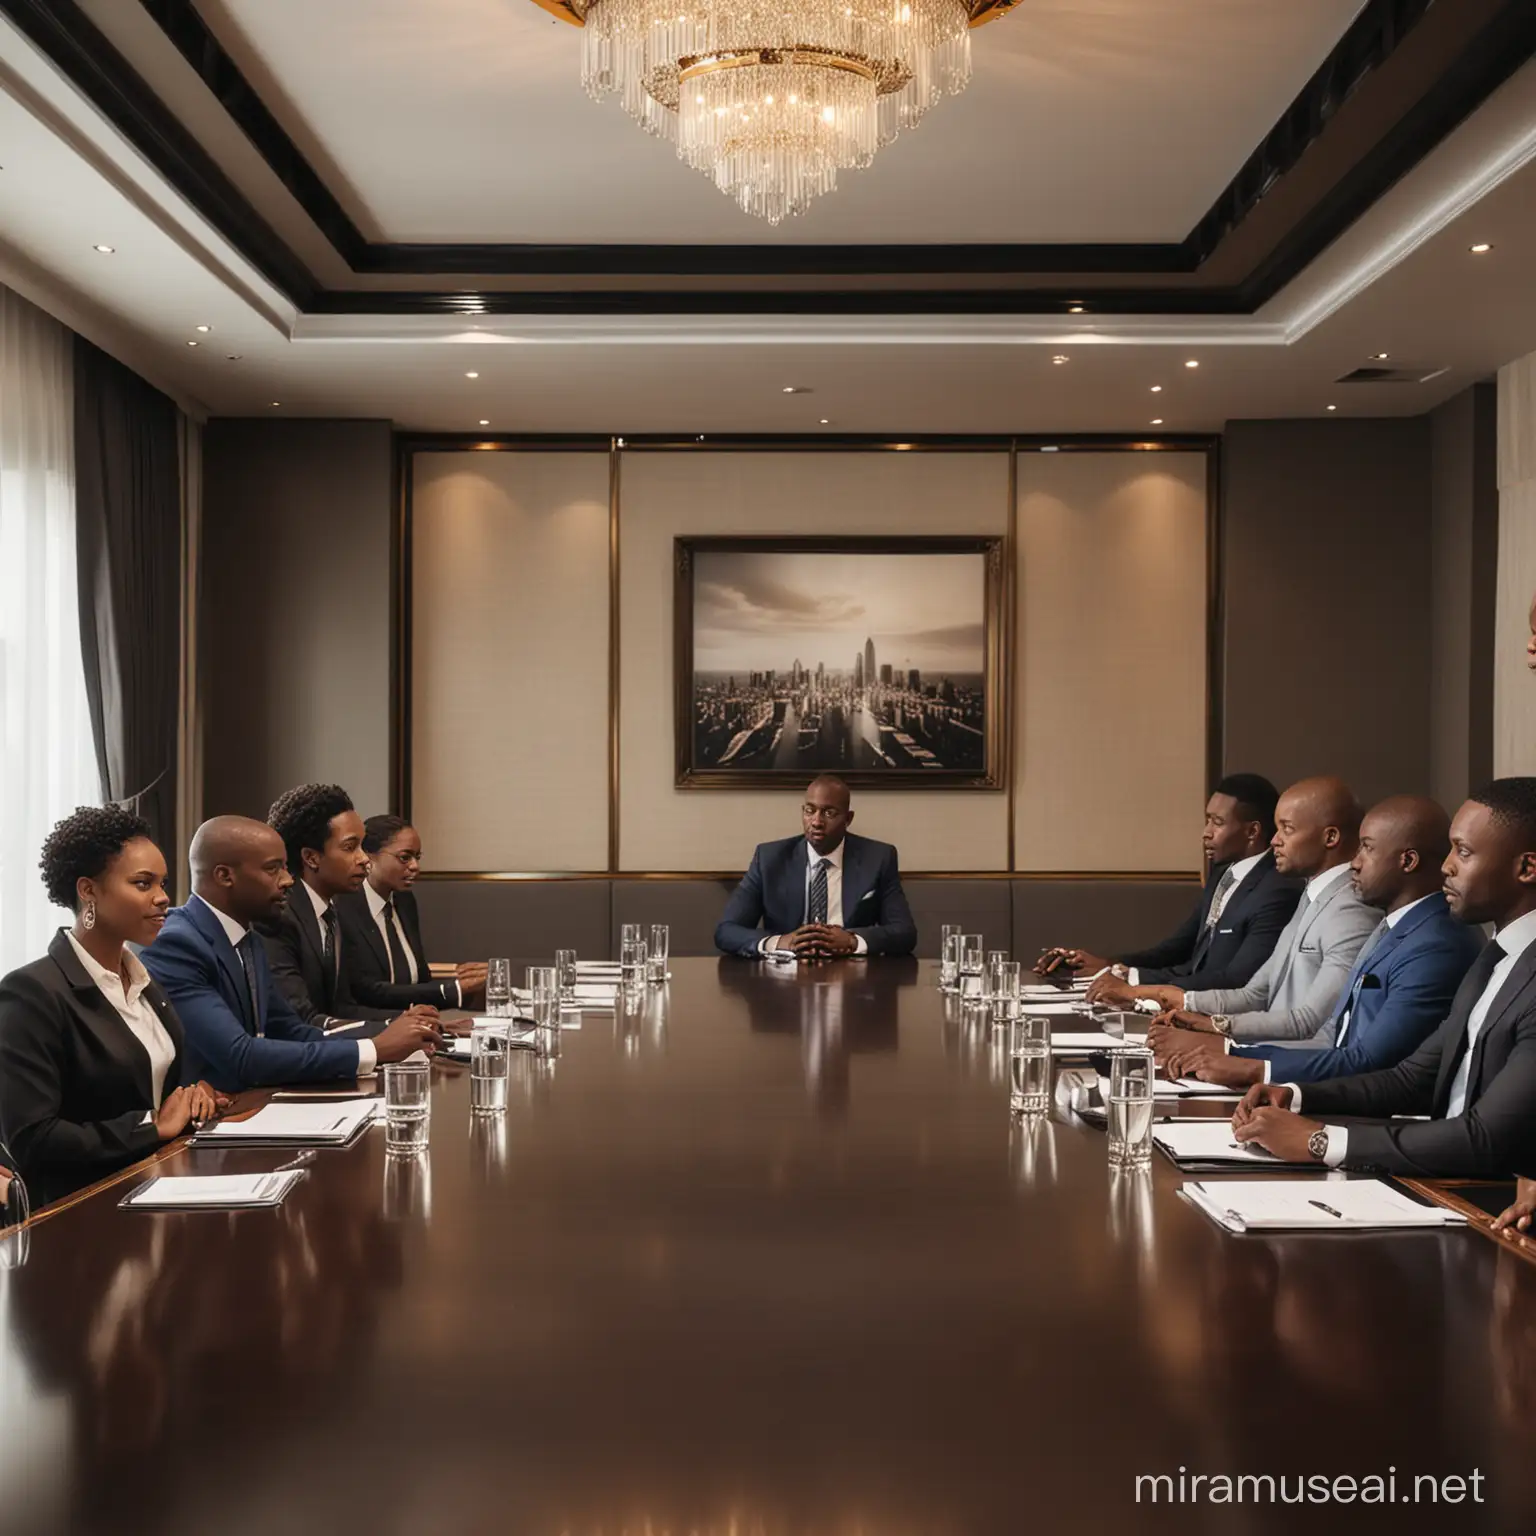 meeting with professional black men and women in a luxury boardroom in Africa
